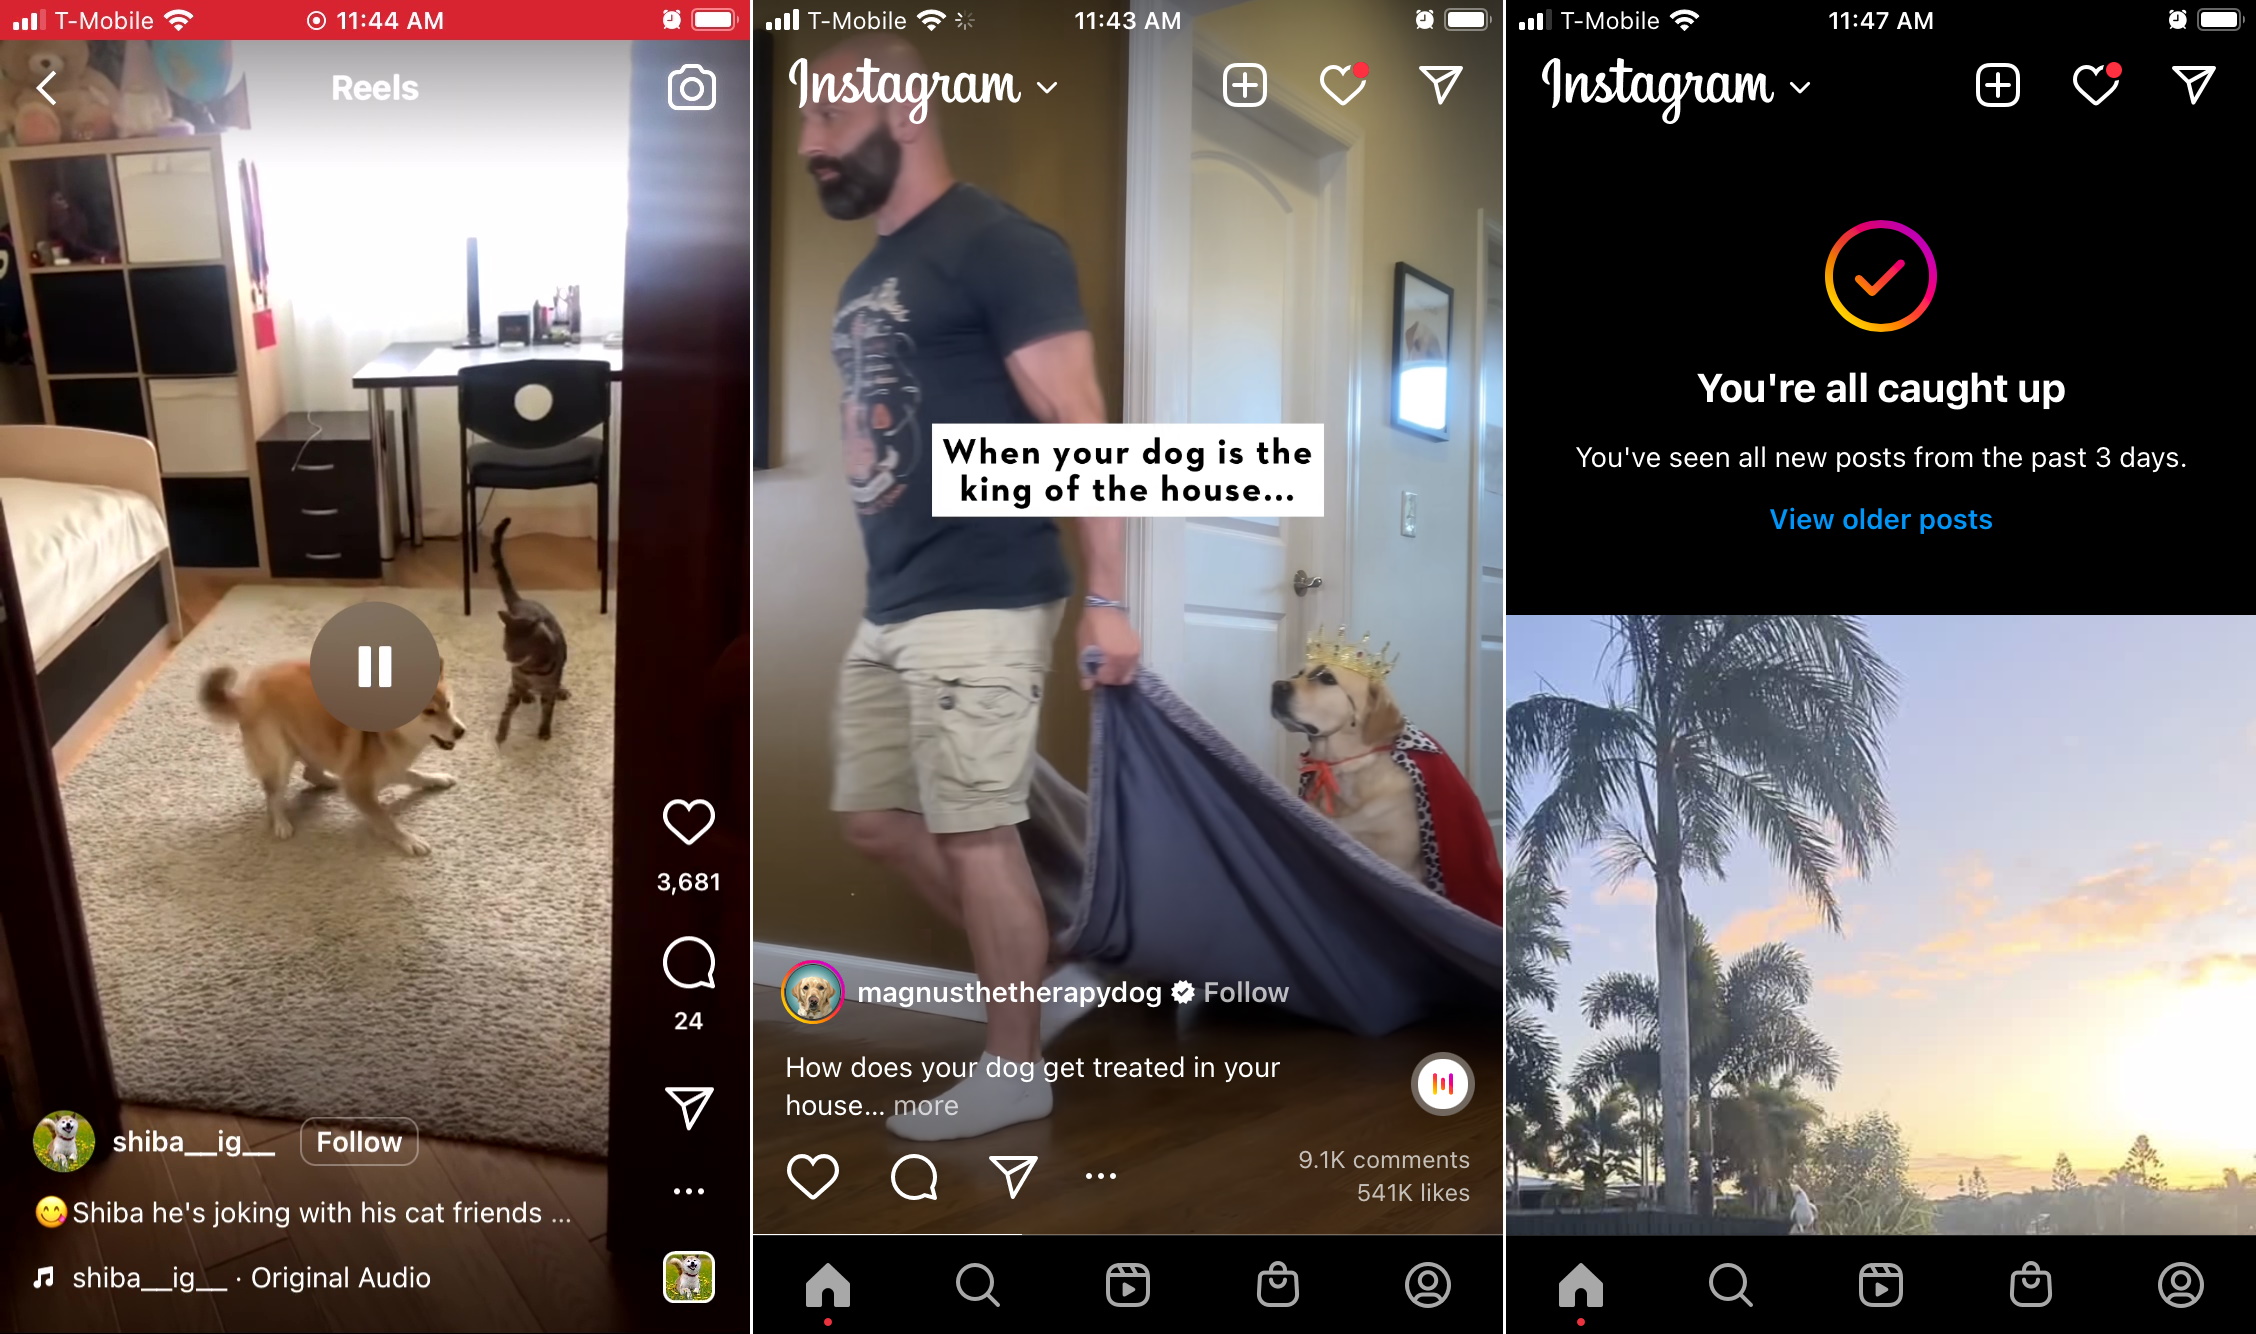 Instagram gets worse with dark patterns lifted from TikTok, example of new Instagram feed with updates